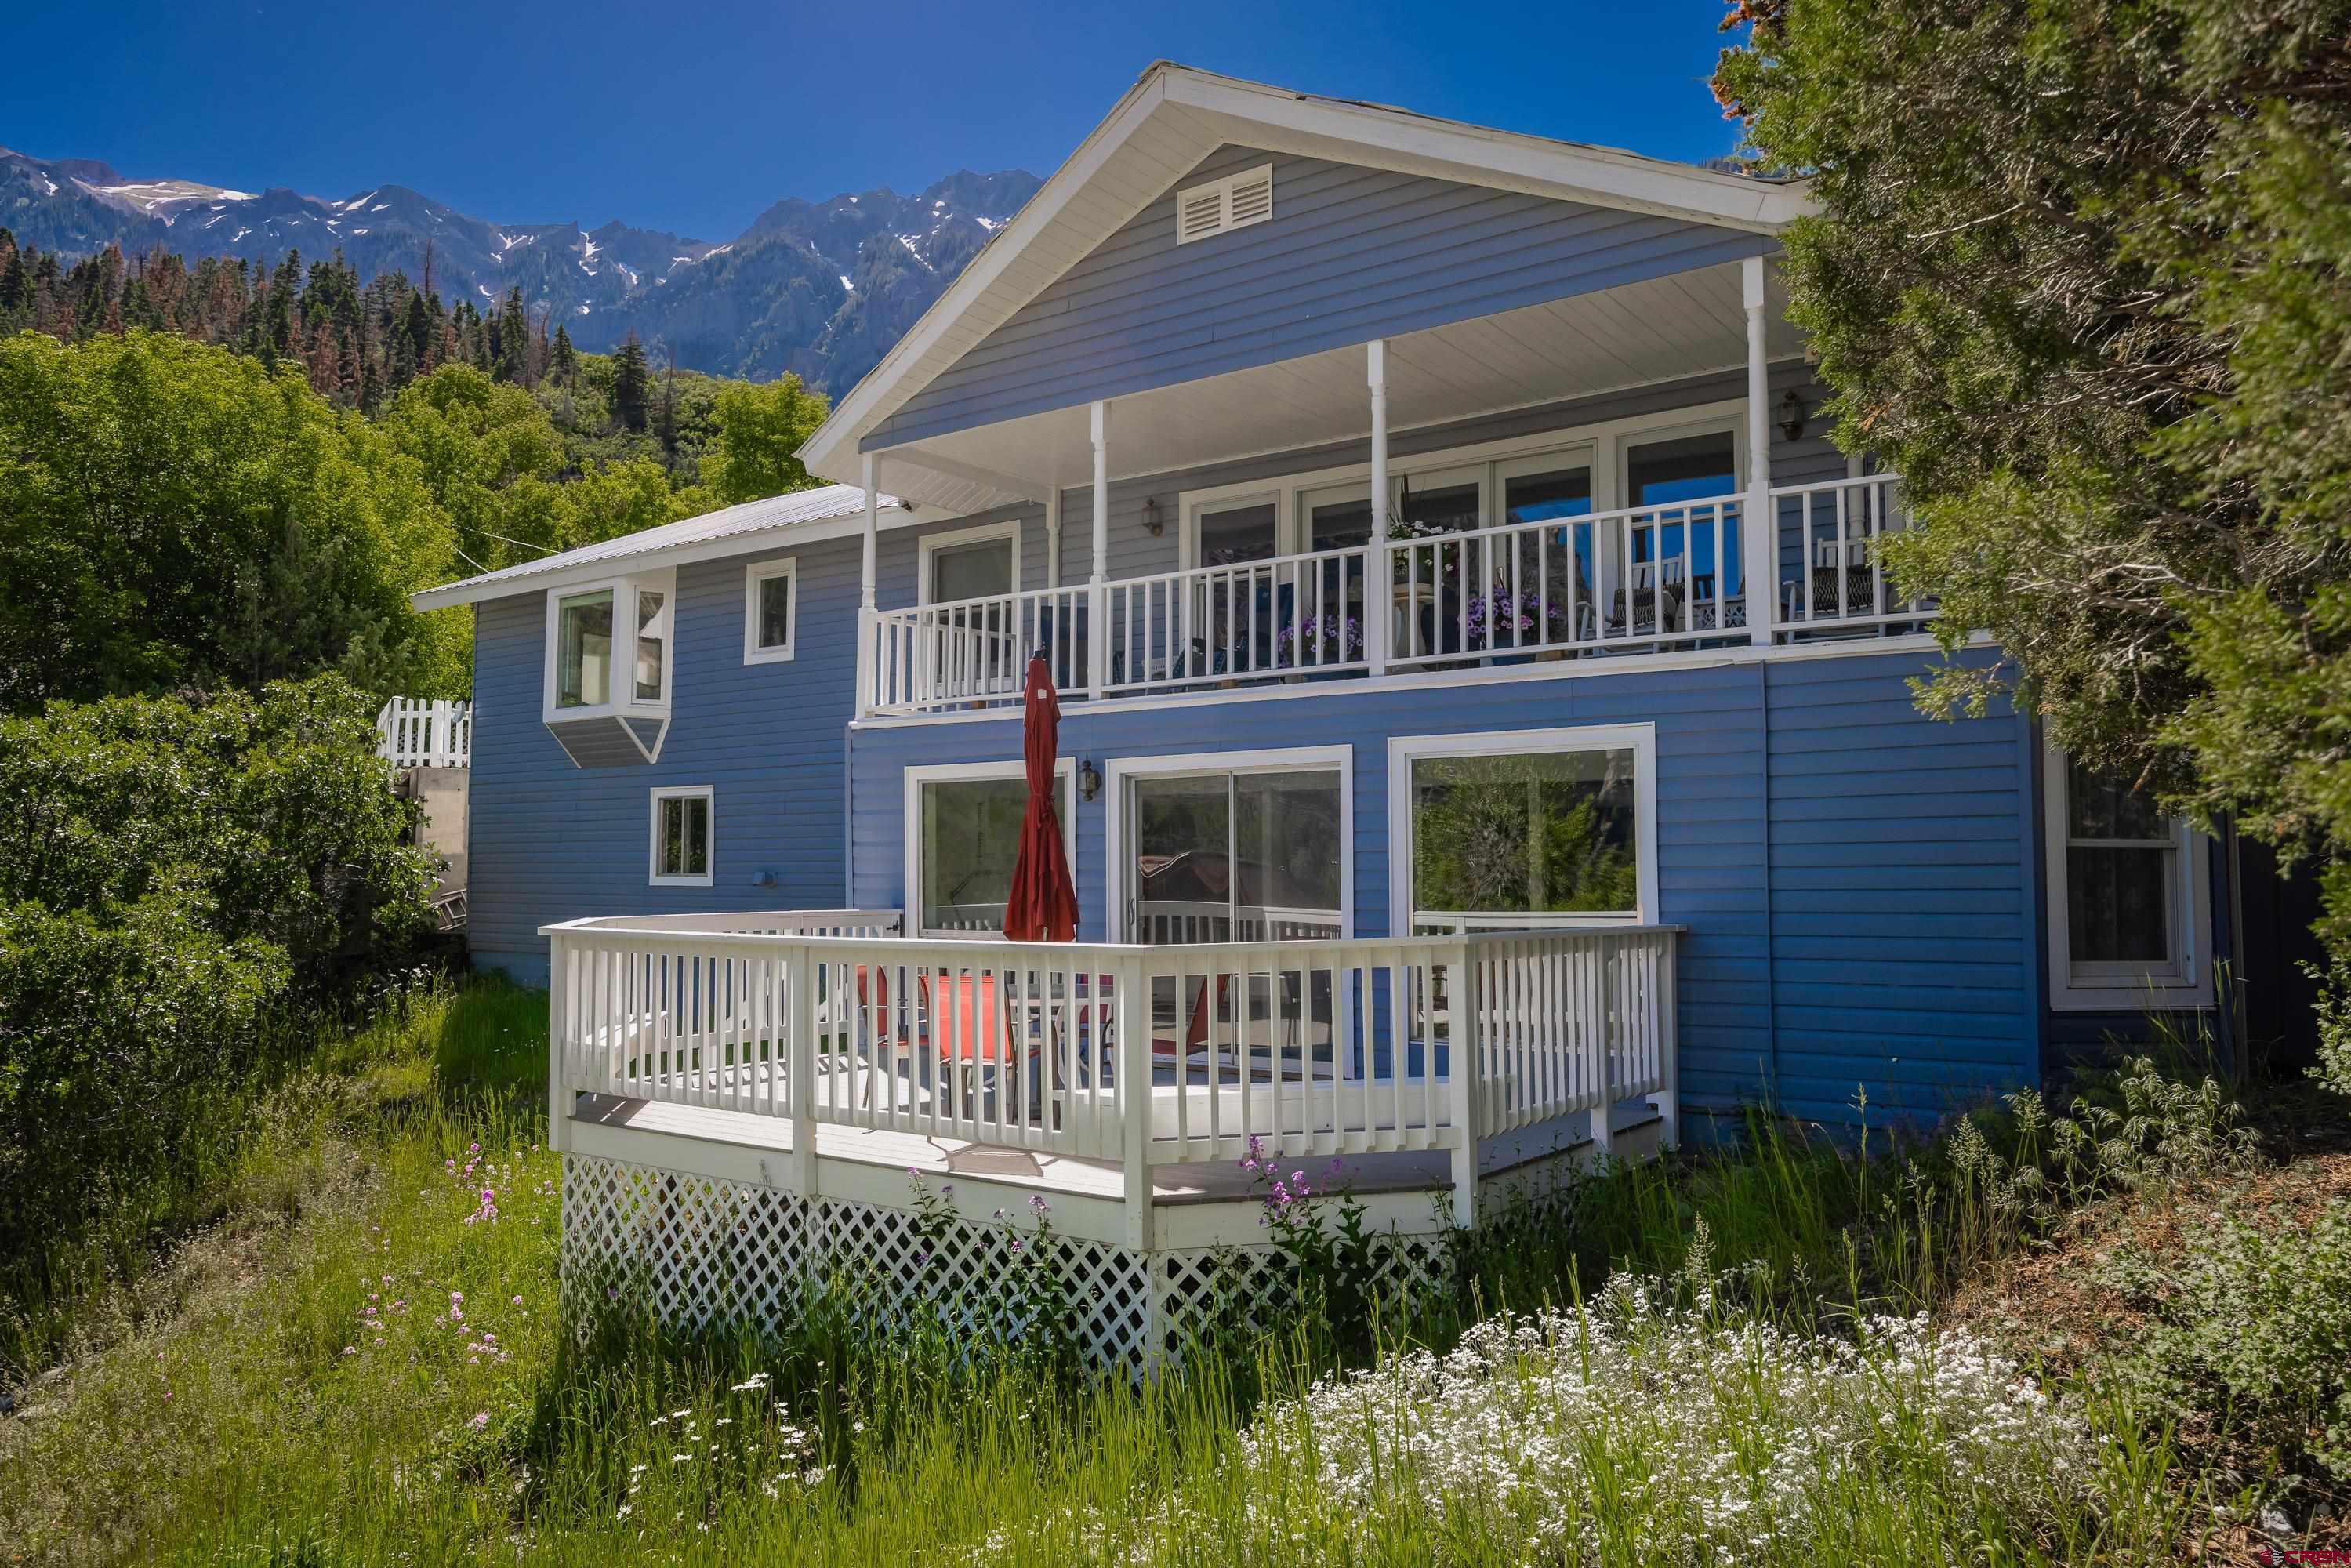 Sitting above Ski Hill in the city of Ouray this home is an entertainers dream! With multiple outdoor areas to entertain guests while enjoying the 360 degree views of the mountains. This home is a one of a kind. With 4 bedrooms and 3 bathrooms there is plenty of room for guests to come visit. There is an apartment downstairs that can be used for rental income or more space for friends and family. There are multiple over sized decks to relax on and take in the spectacular views! There is tons of storage through out the home. This home has breathtaking views from every window!